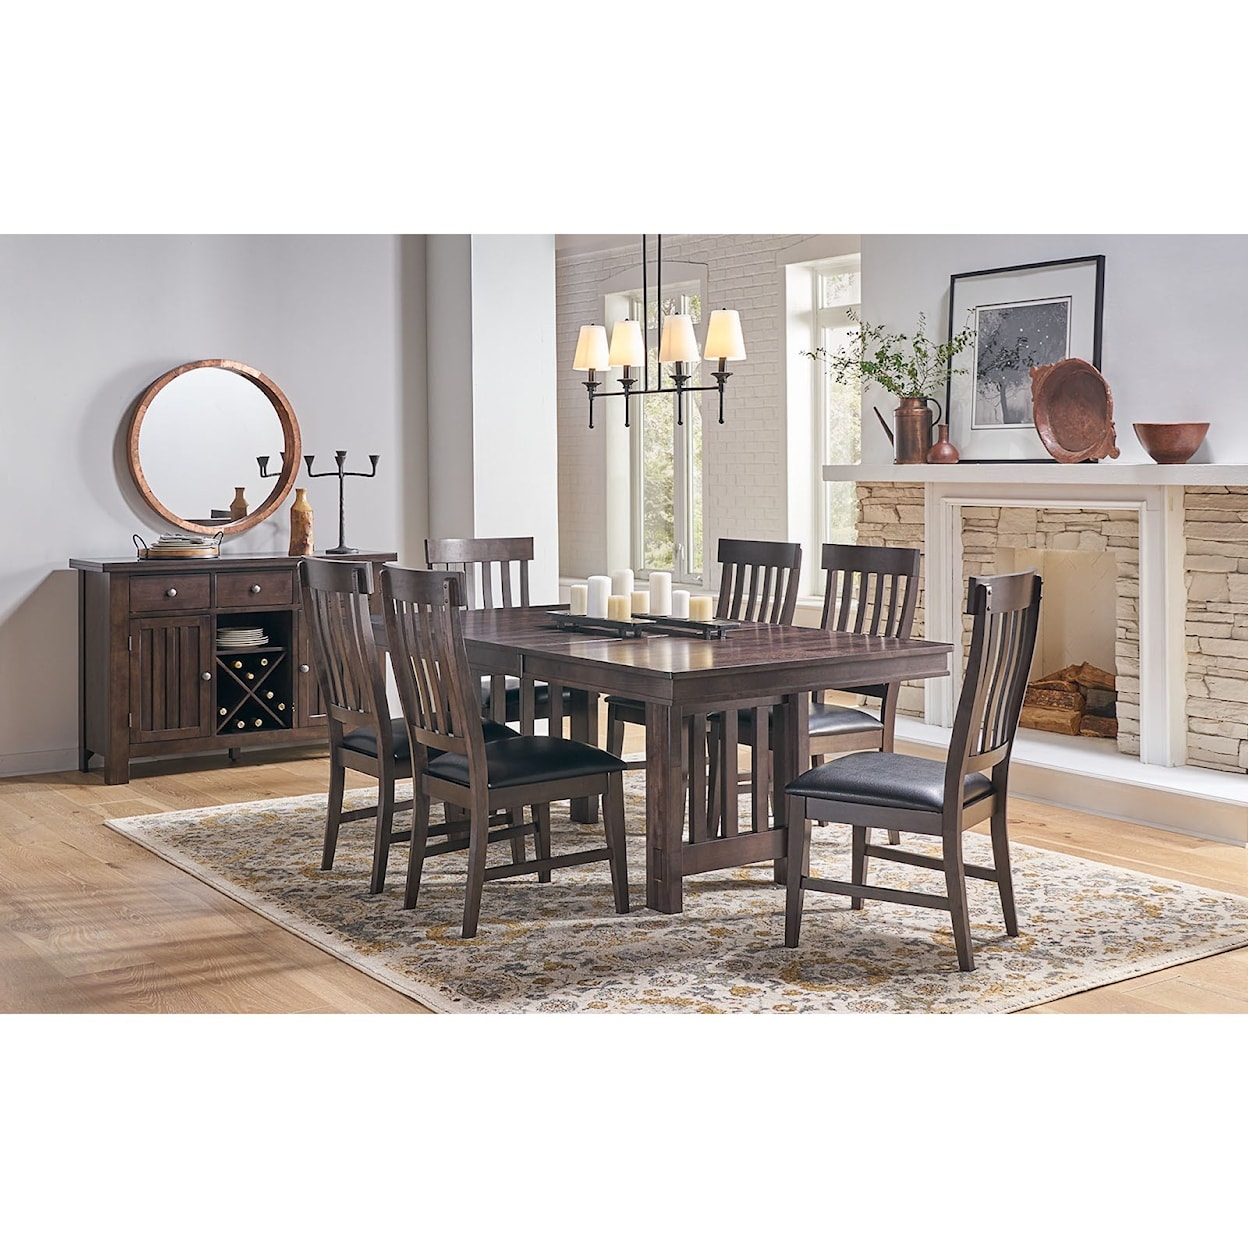 AAmerica Bremerton 7-Piece Dining and Chair Set